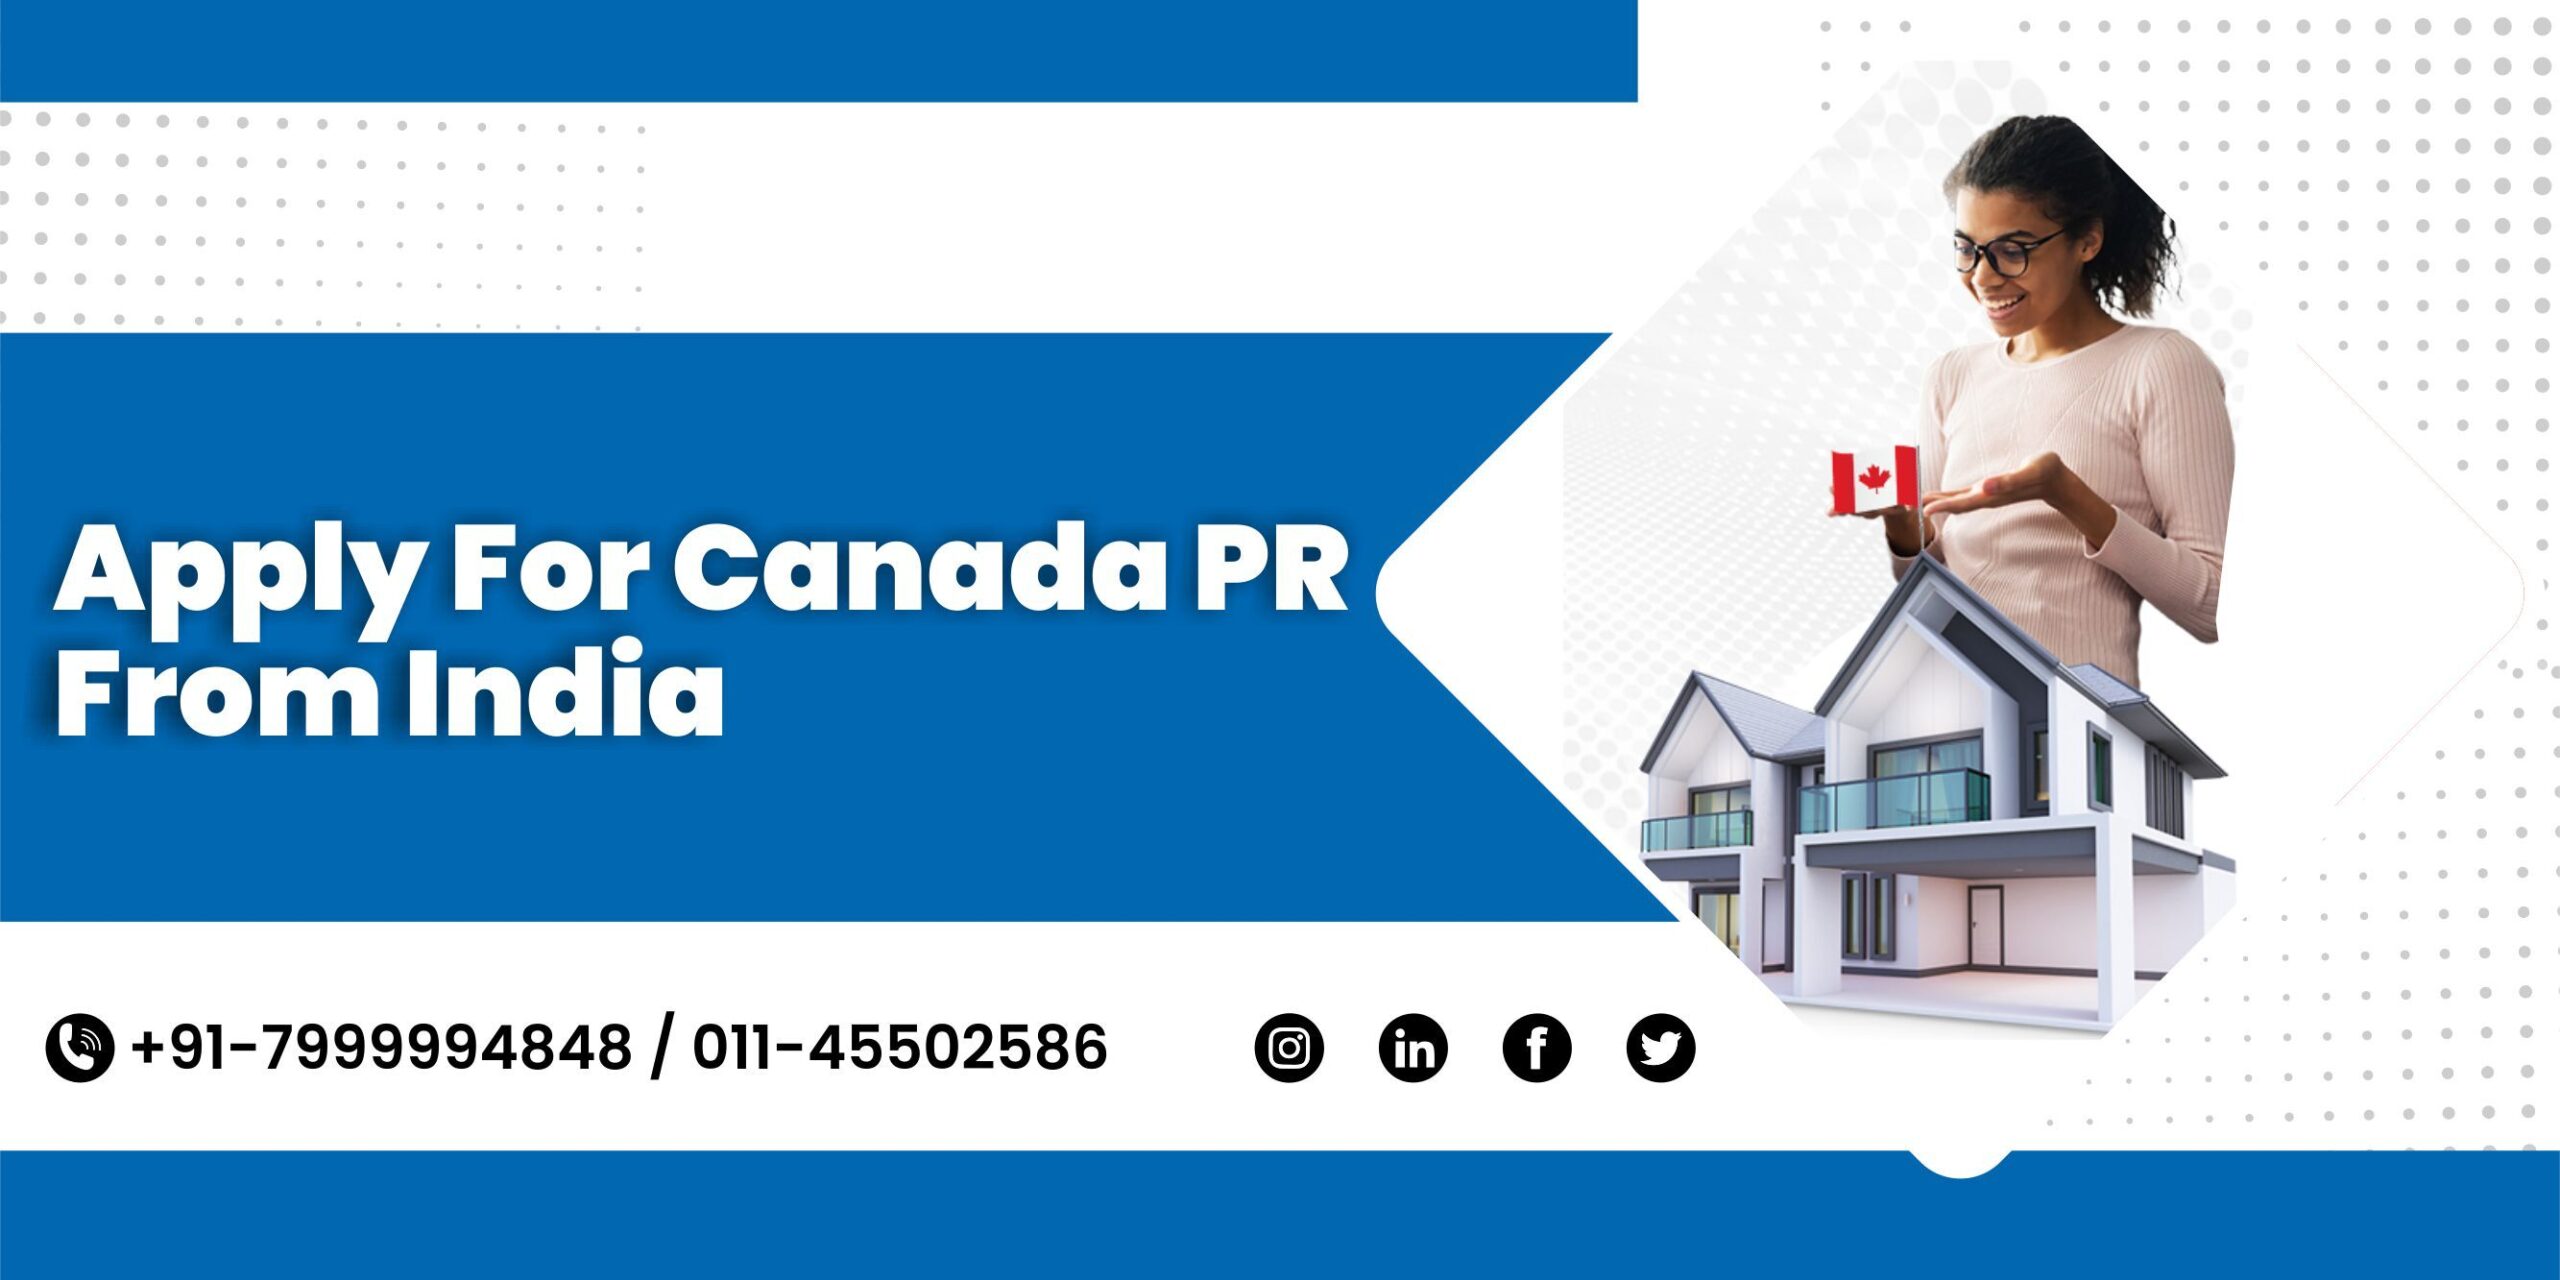 Apply for Canada PR from India